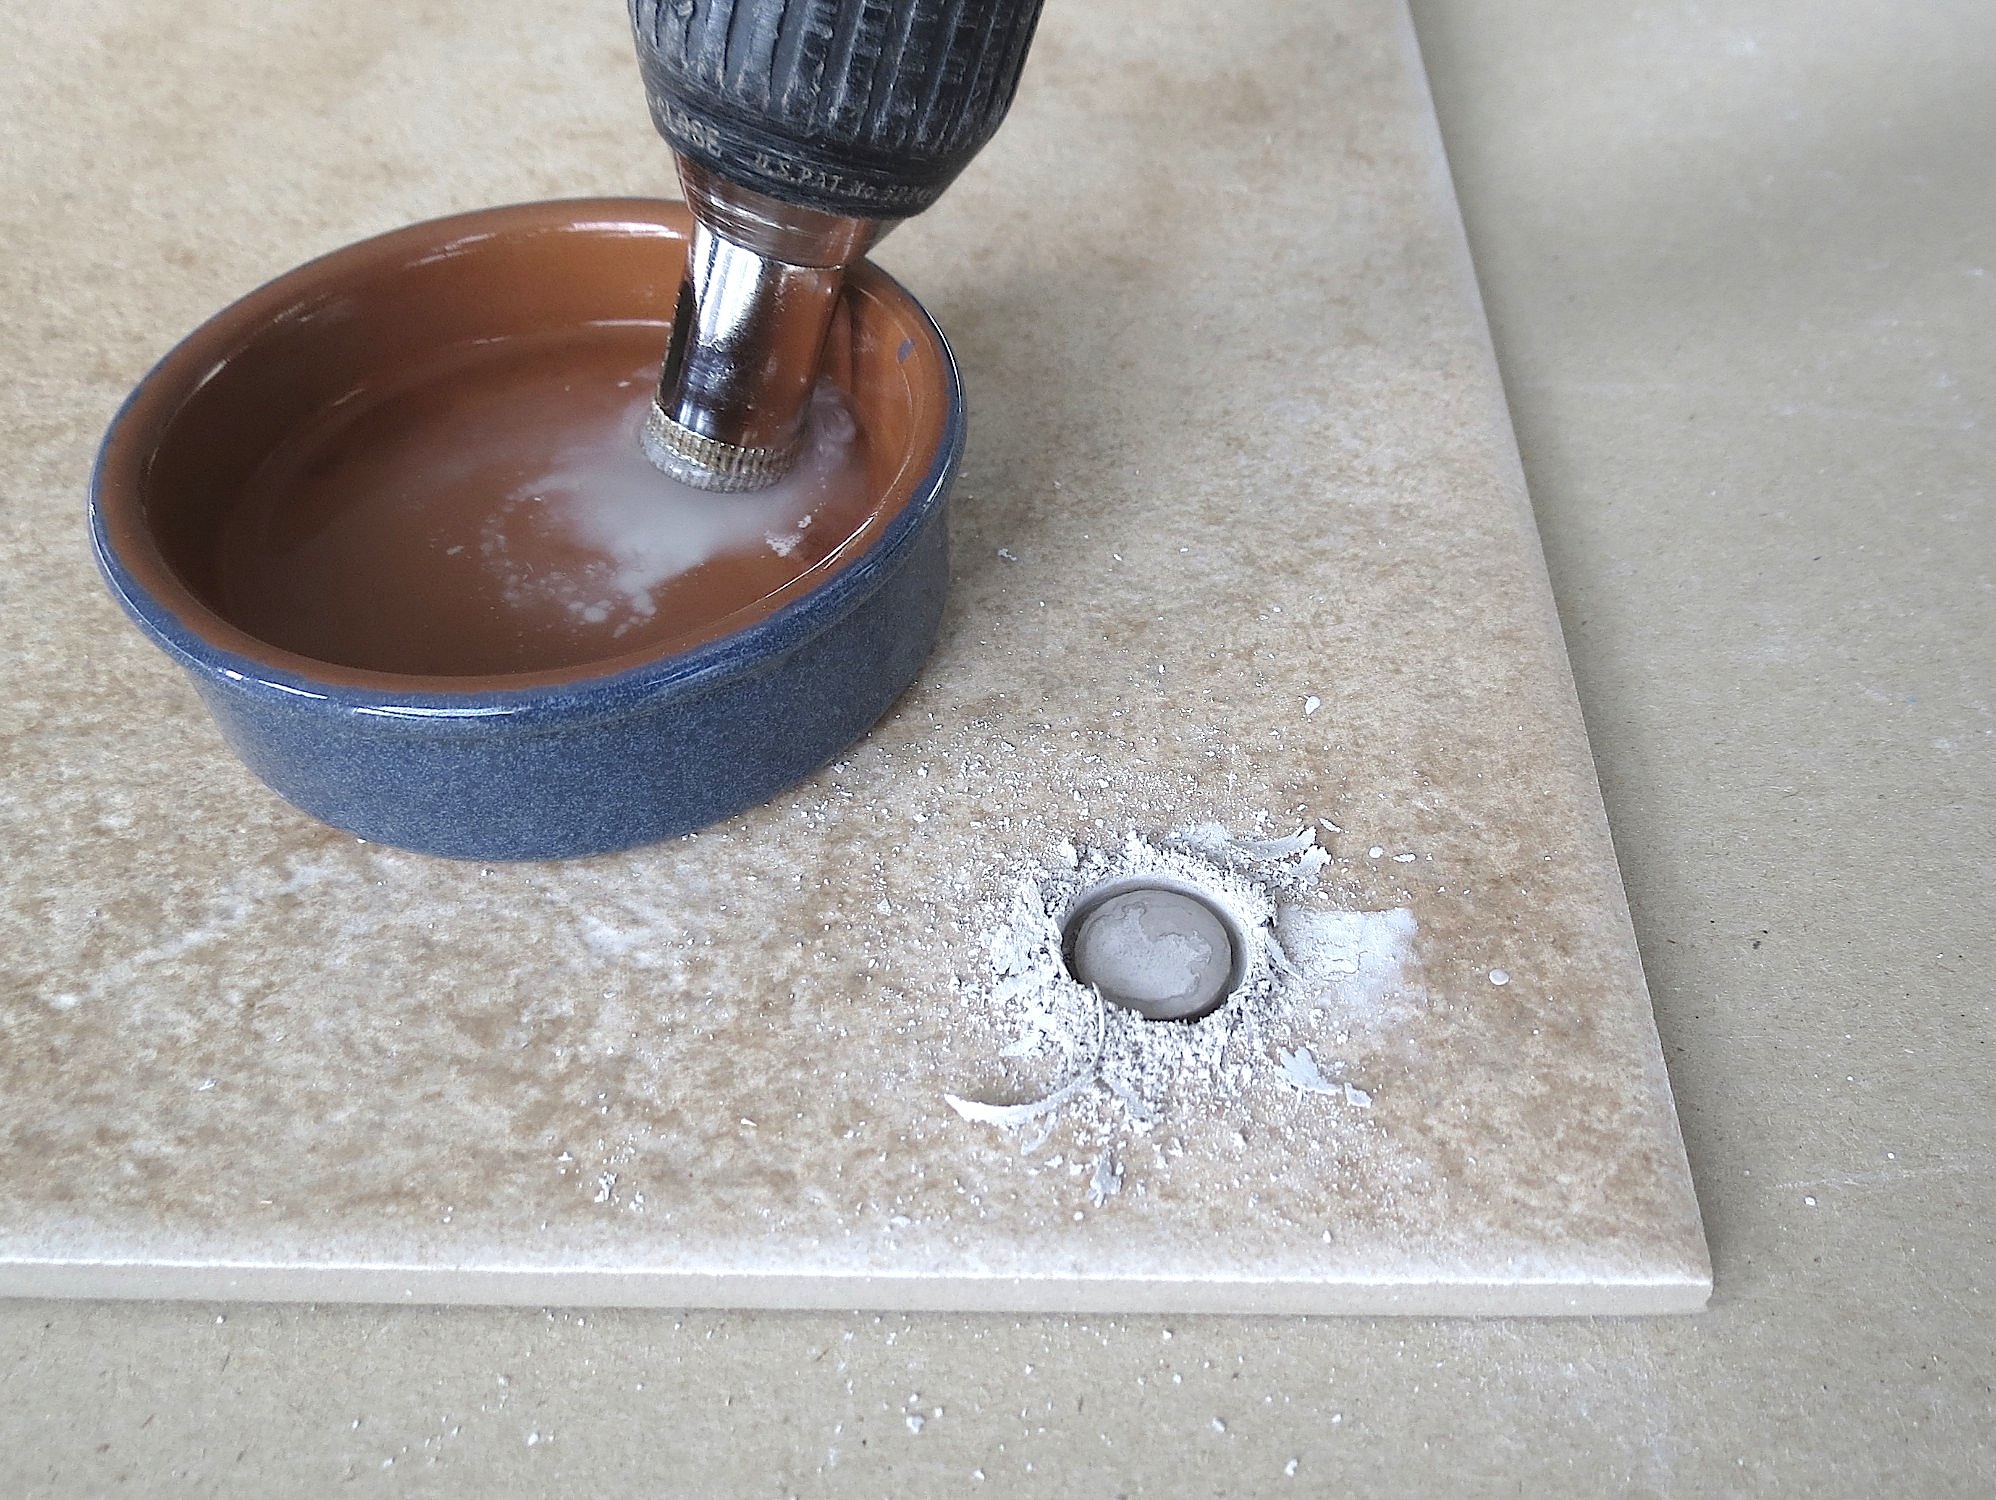 Julian Cassell's DIY Blog » Blog Archive Drilling into porcelain tiles HOW TO DIY WHAT TO